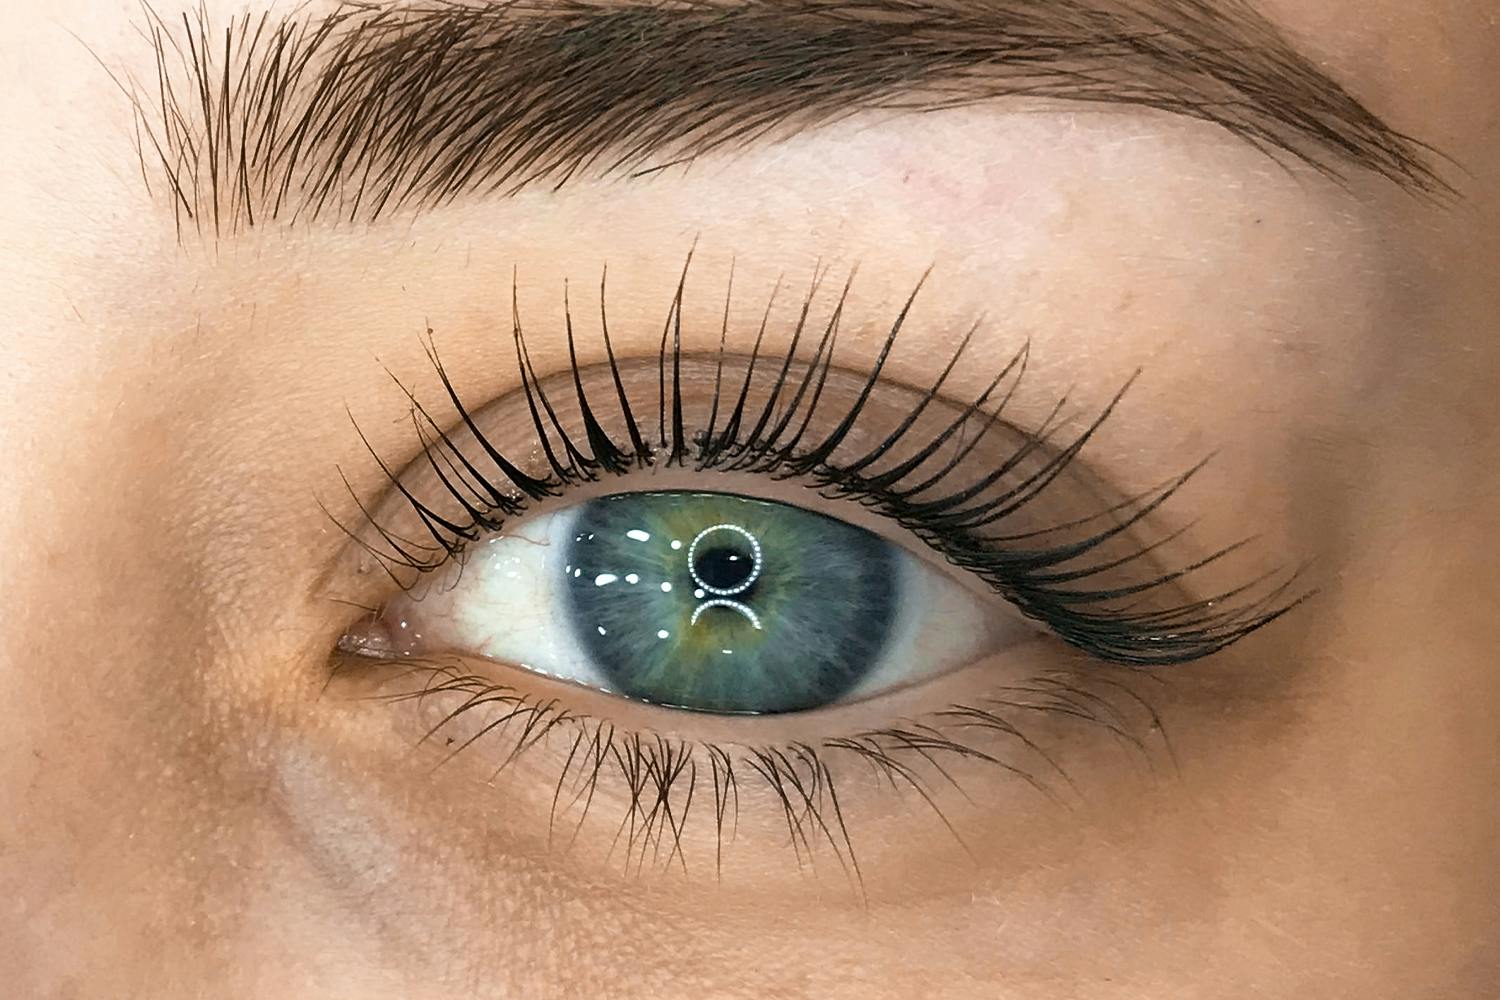 The Lashes Lifting treatment gives the natural lashes an extraordinary curl